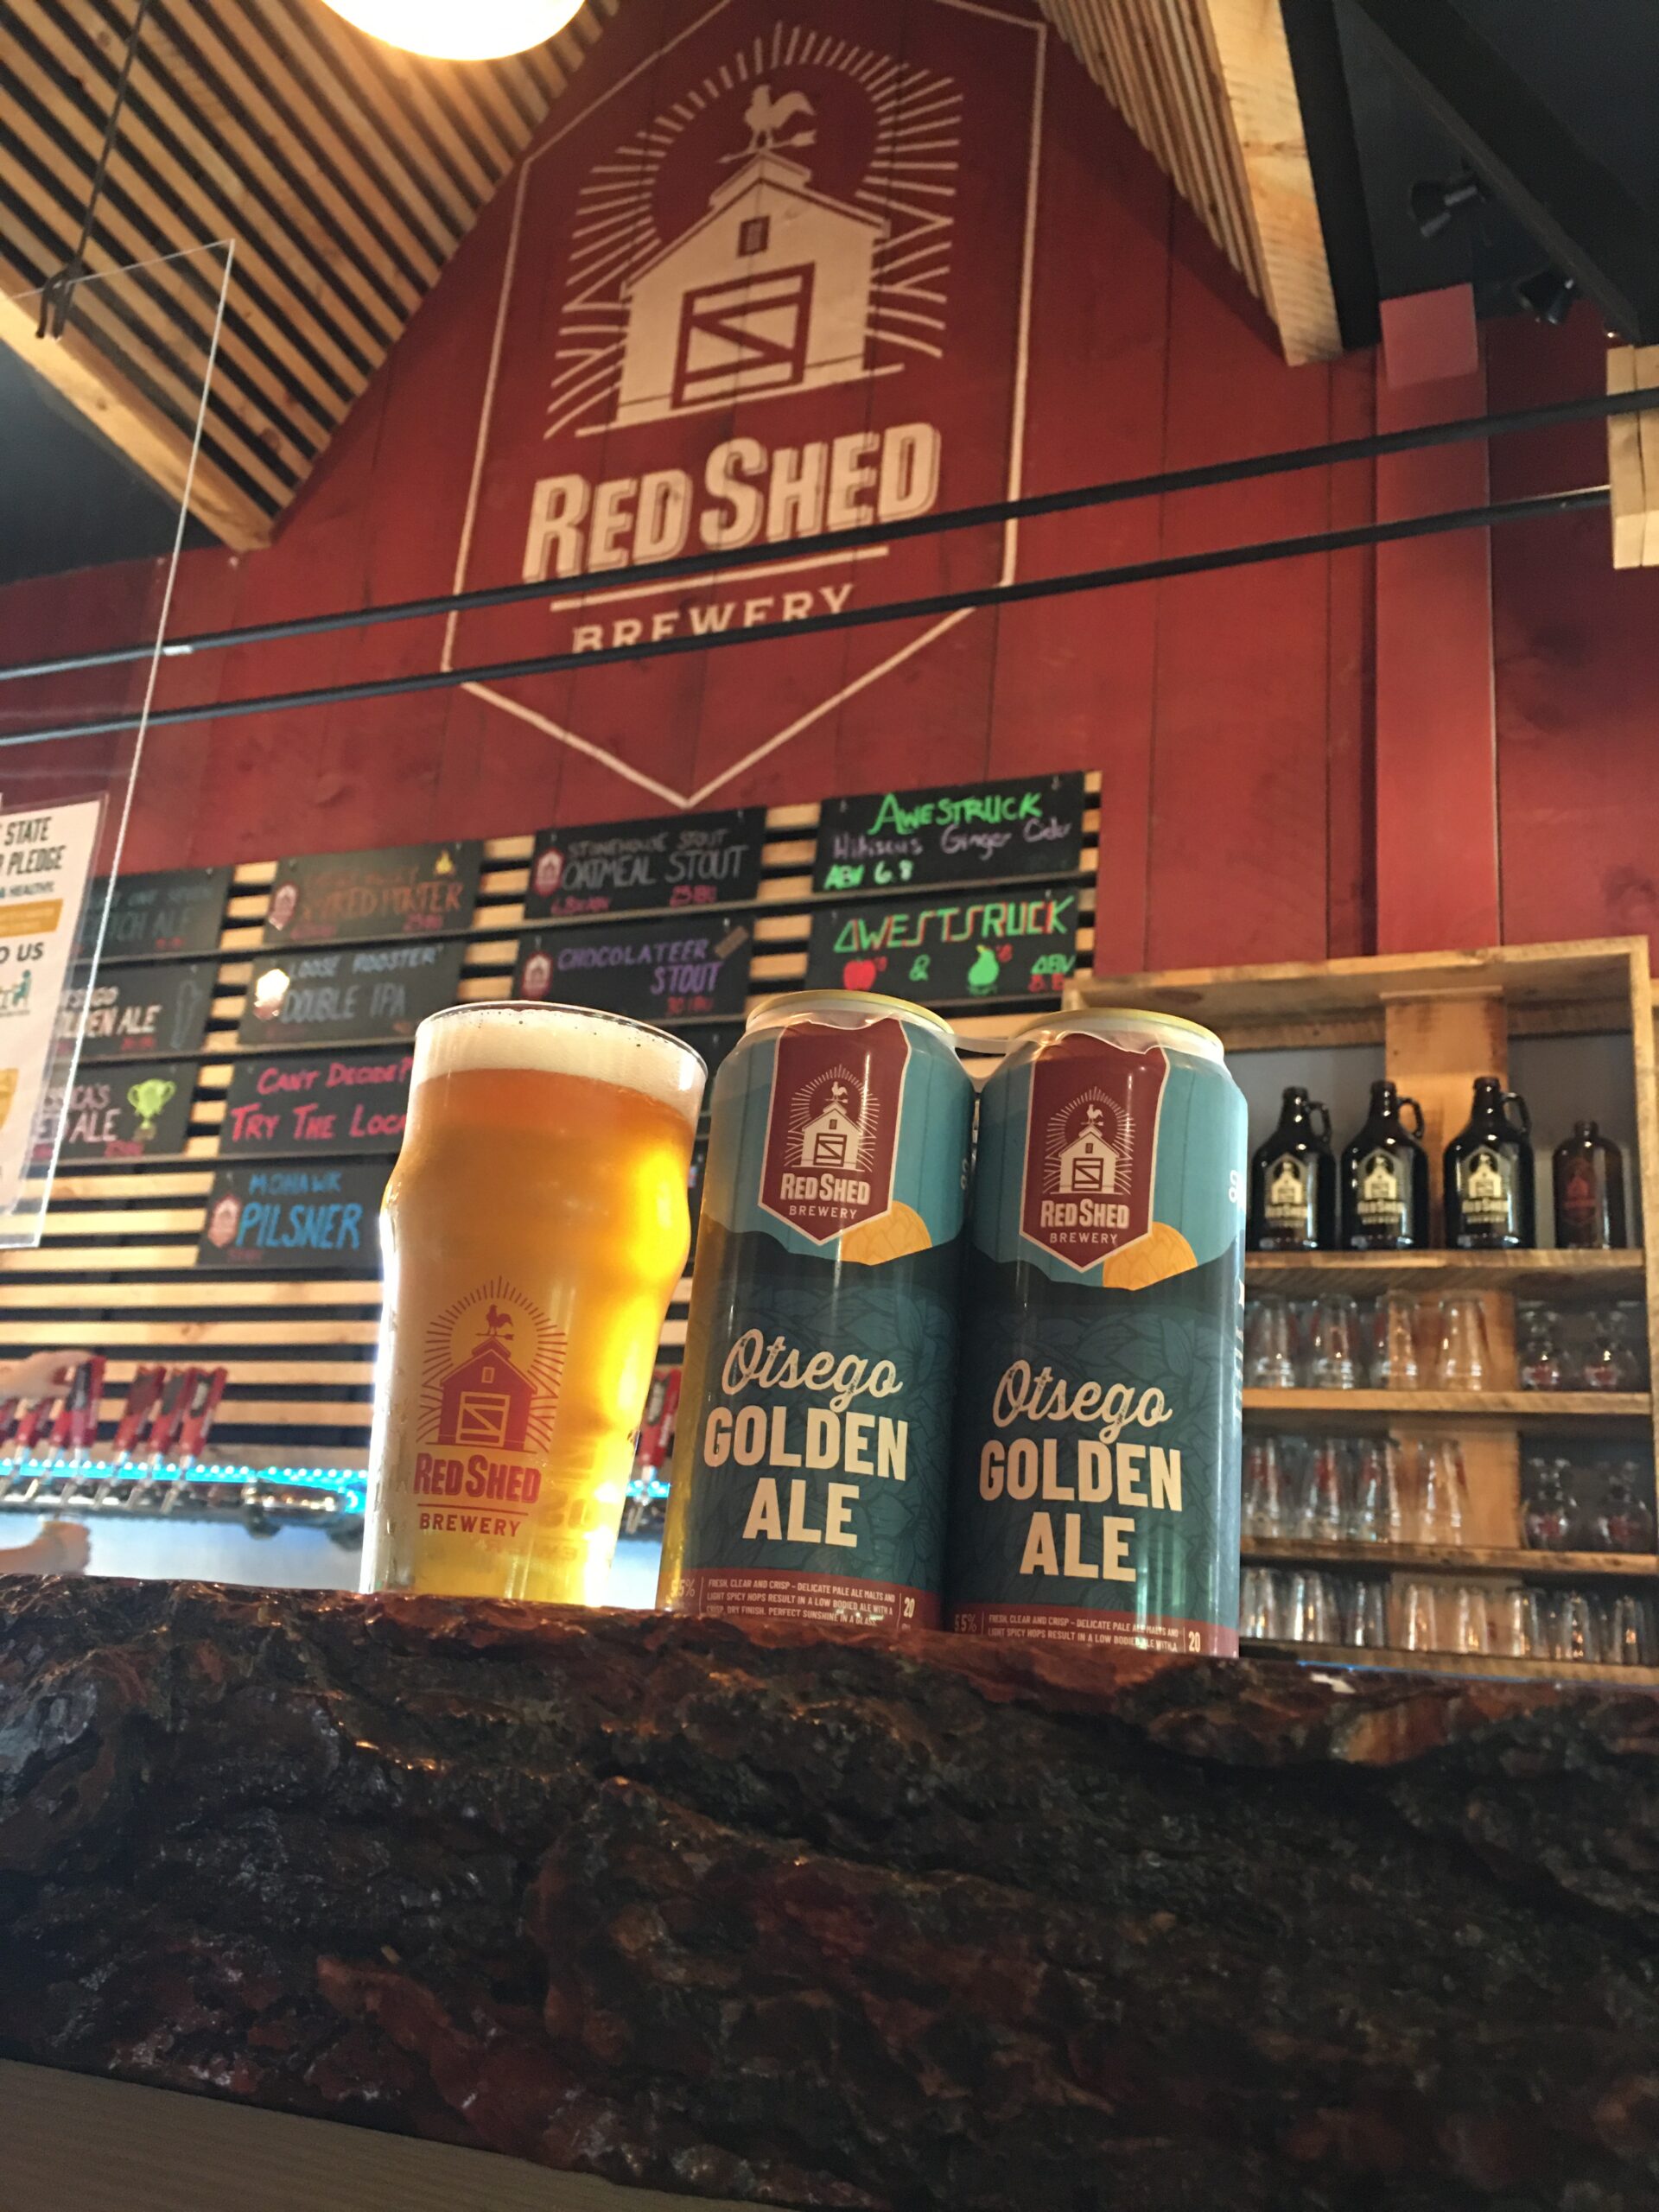 Otsego Golden Ale, Red Shed Brewing